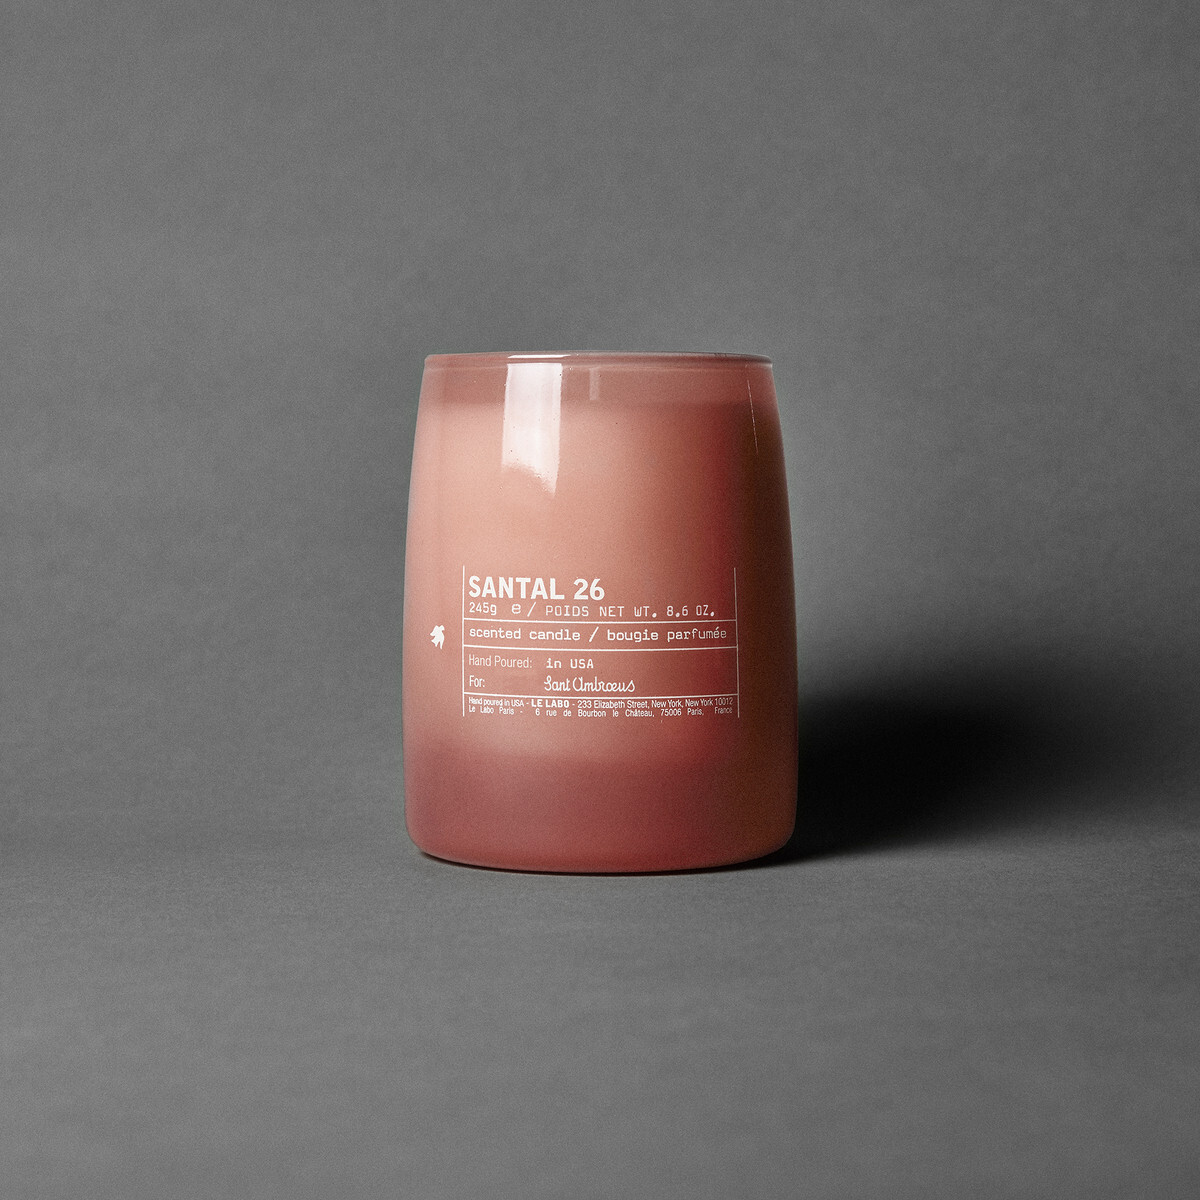 Le Labo x Sant Ambroeus santal 26, one of the best valentine's day candles